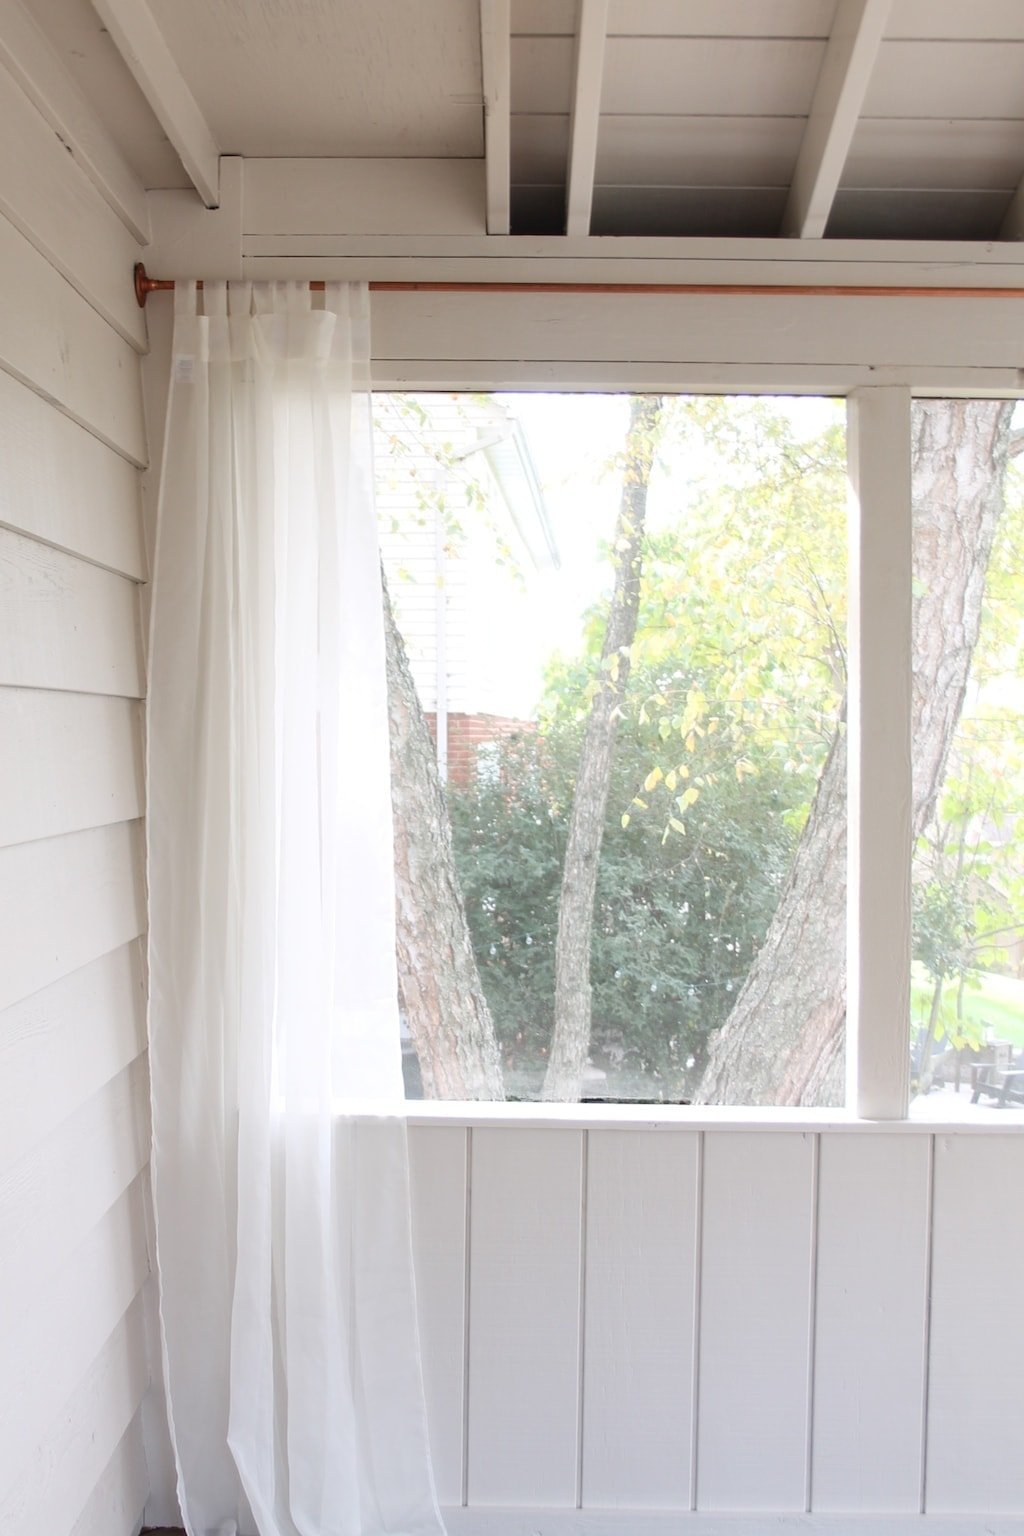 A close up of a window with cream curtains.